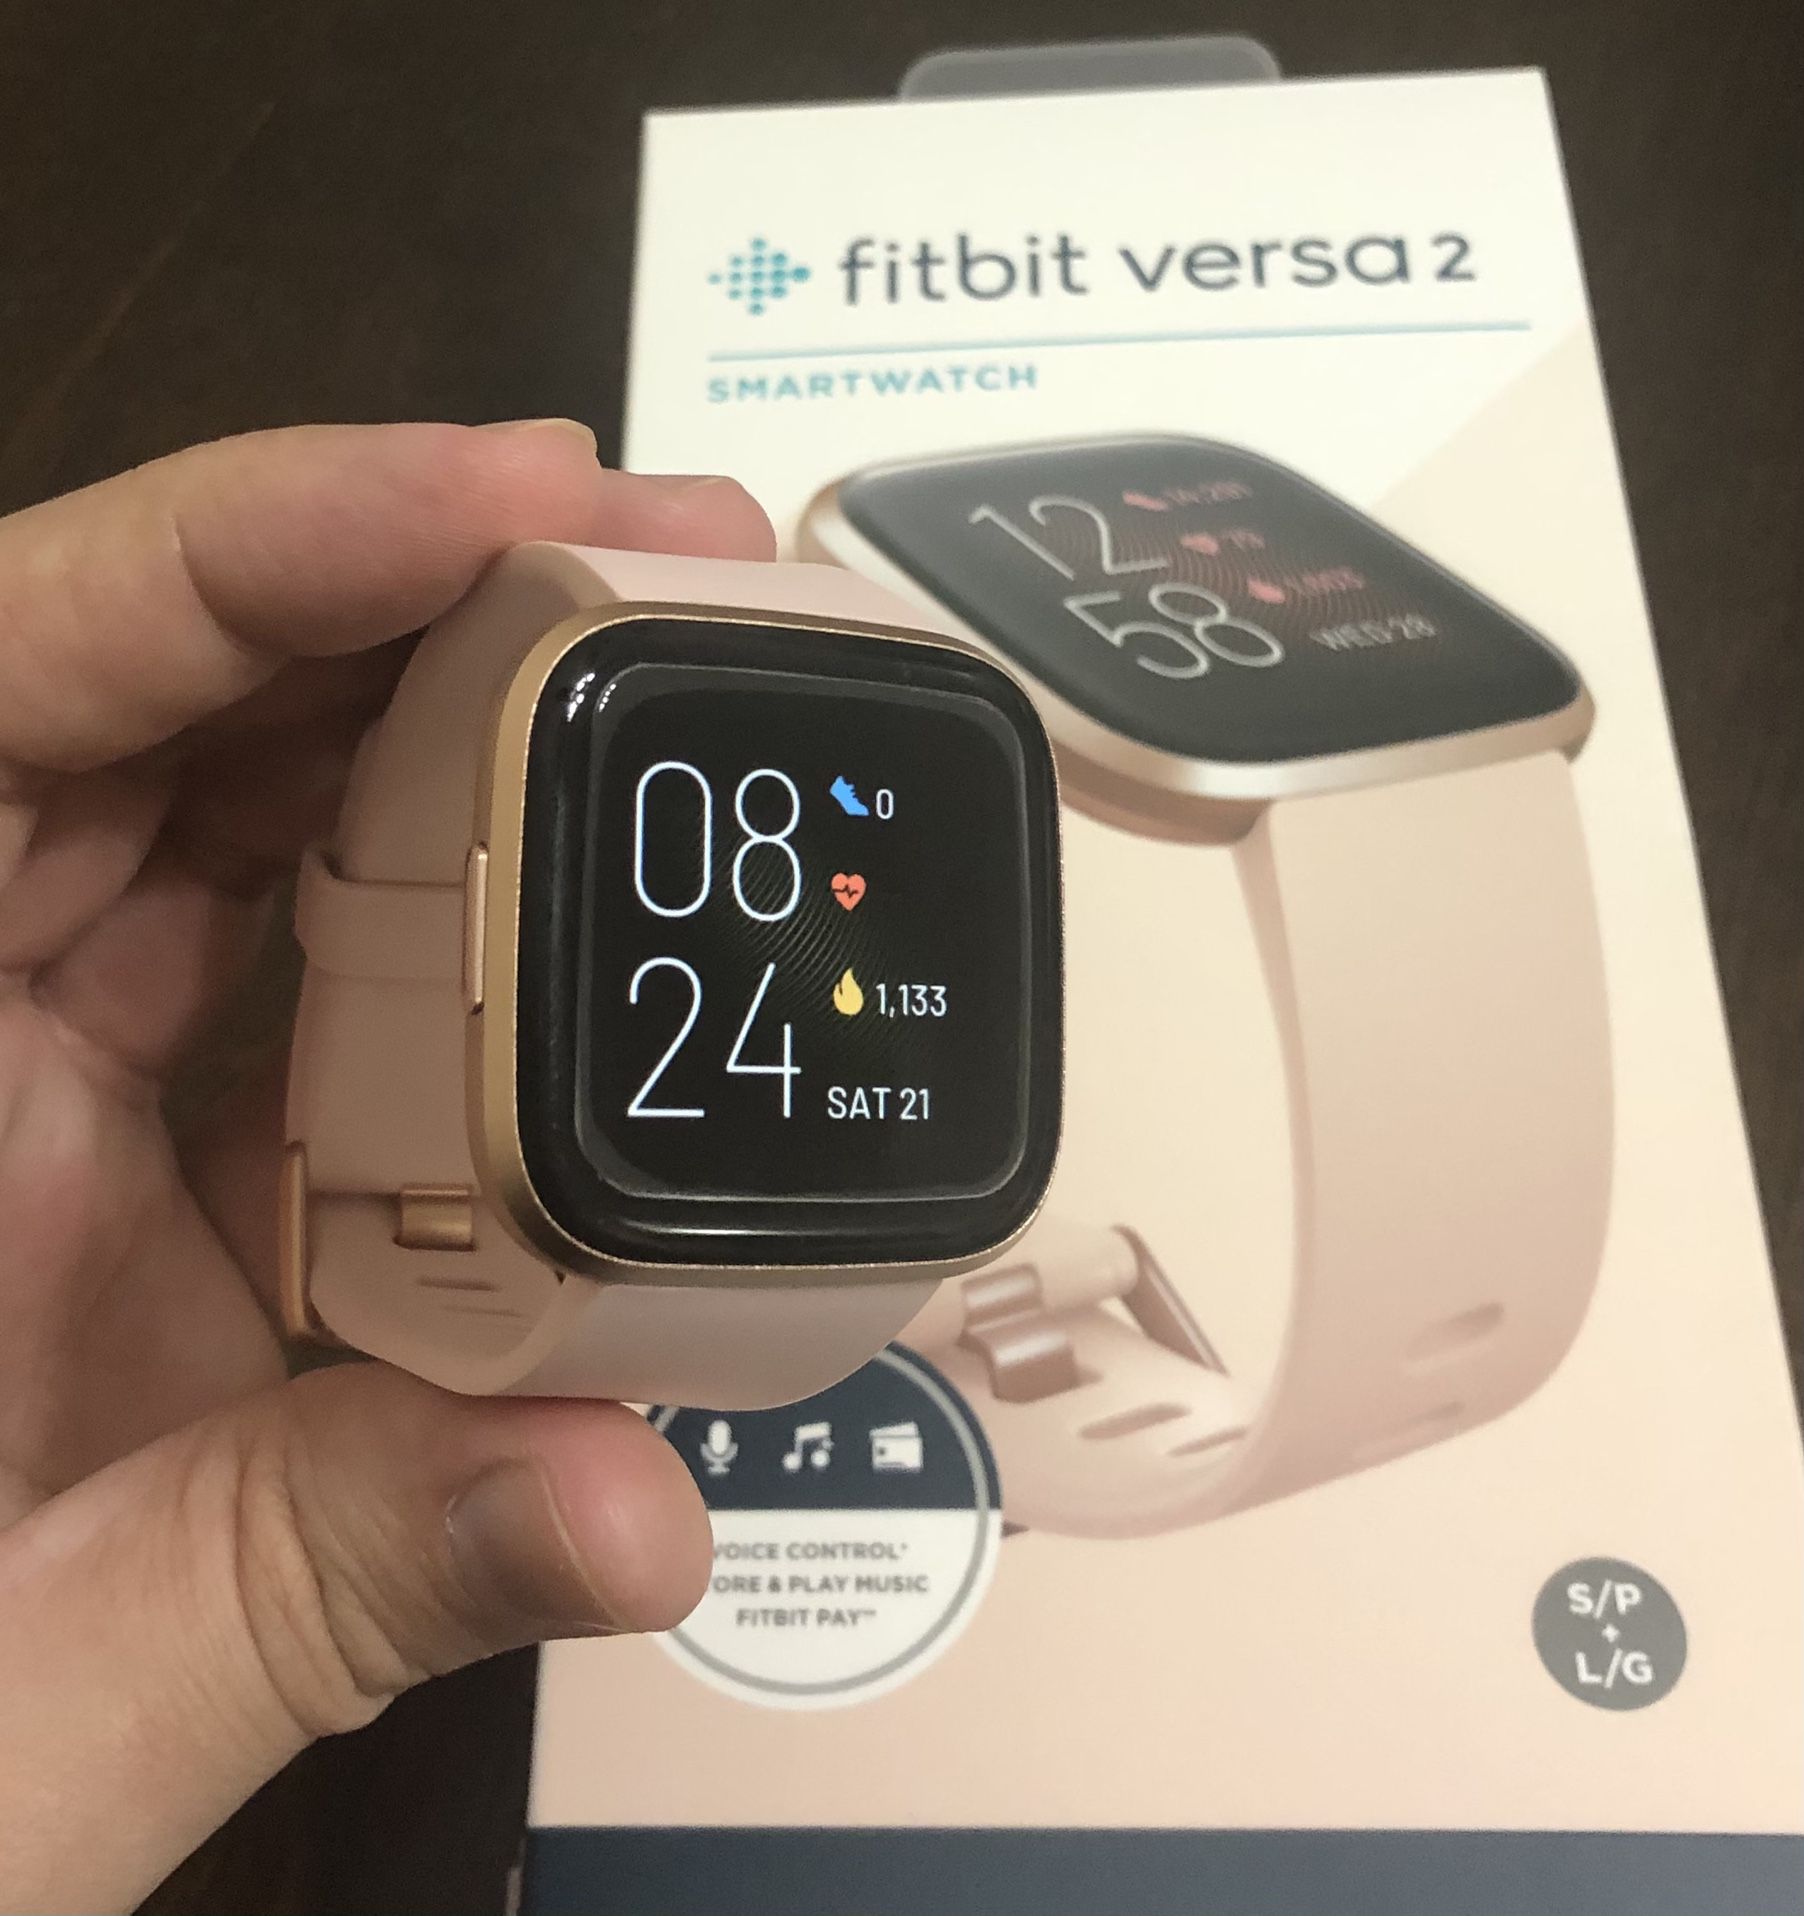 Fitbit Versa 2 - Like brand New (Pink Color)